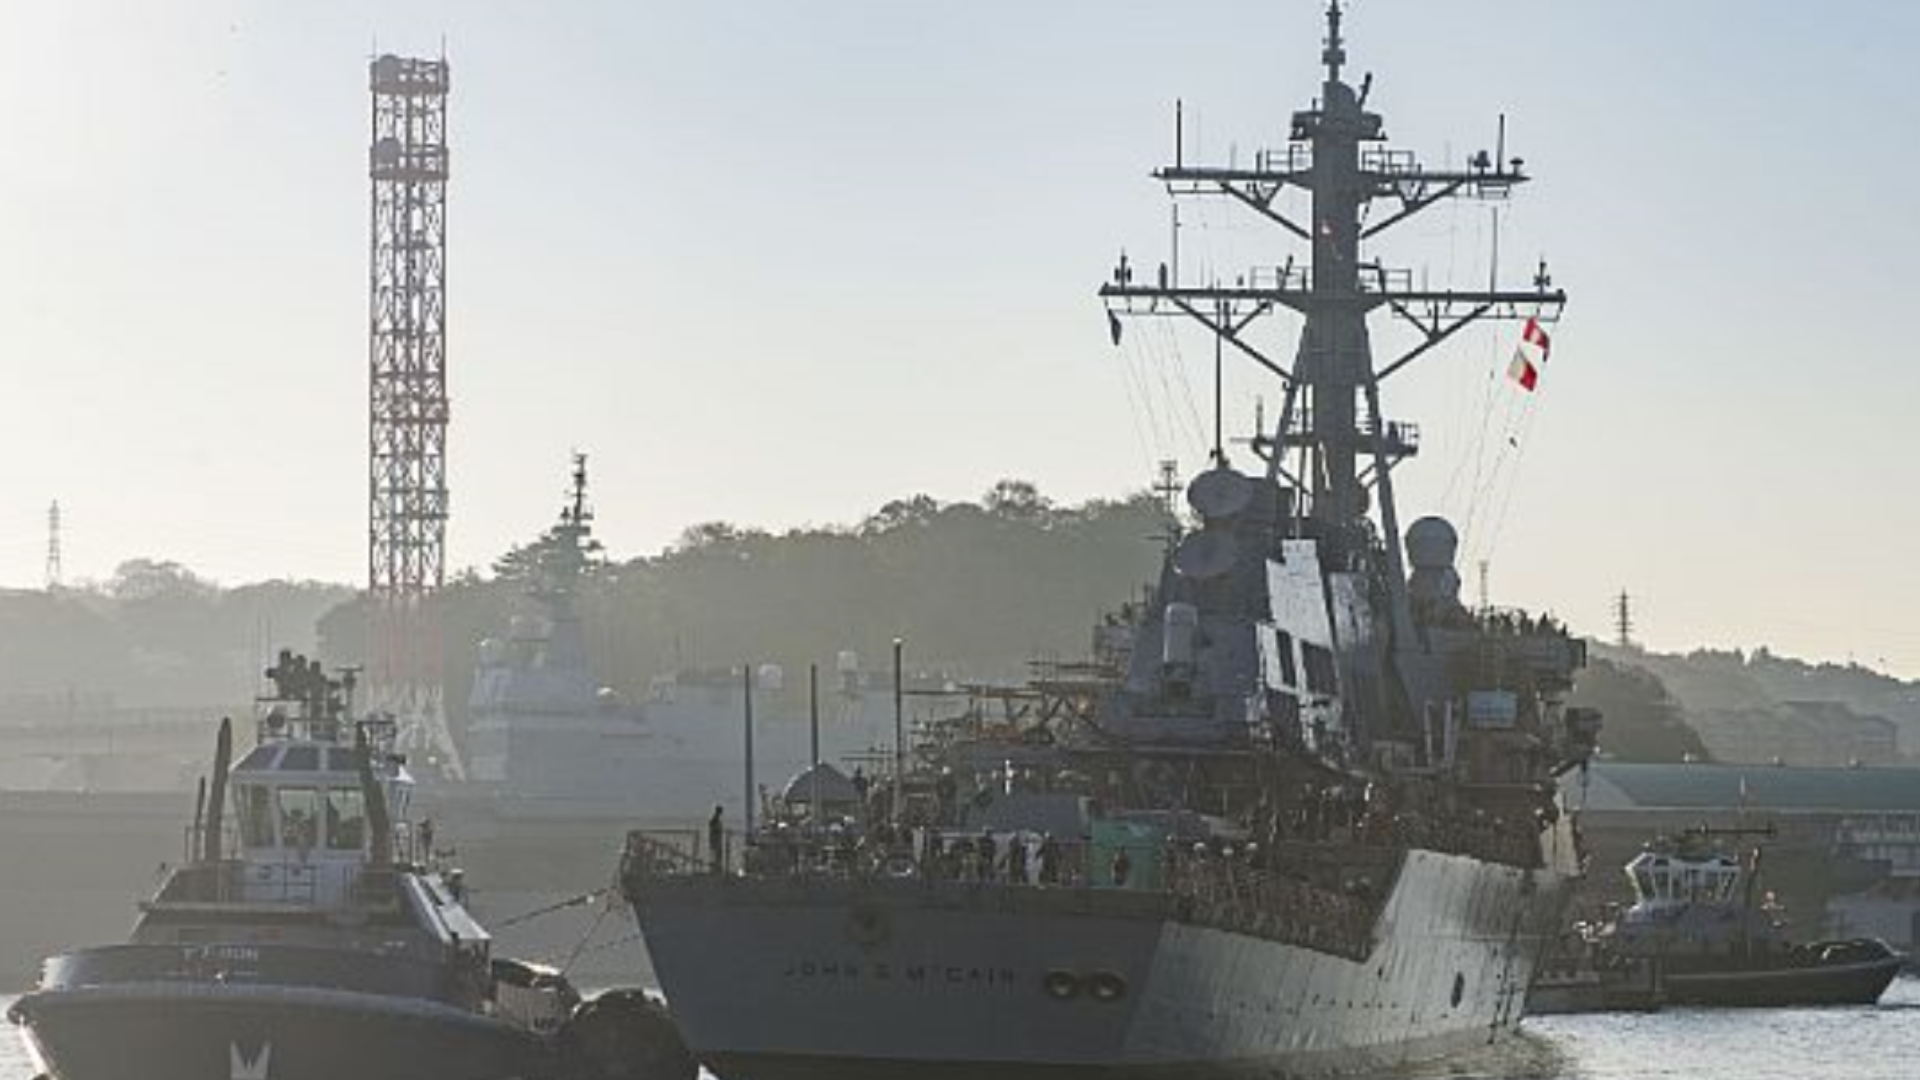 The Navy warship named for three generations of McCains is at the center of a storm over whether the White House wanted it kept out of sight while President Trump was in Japan. President Trump and Meghan McCain spoke out, but there are still questions about whether the USS John McCain was actually hidden.